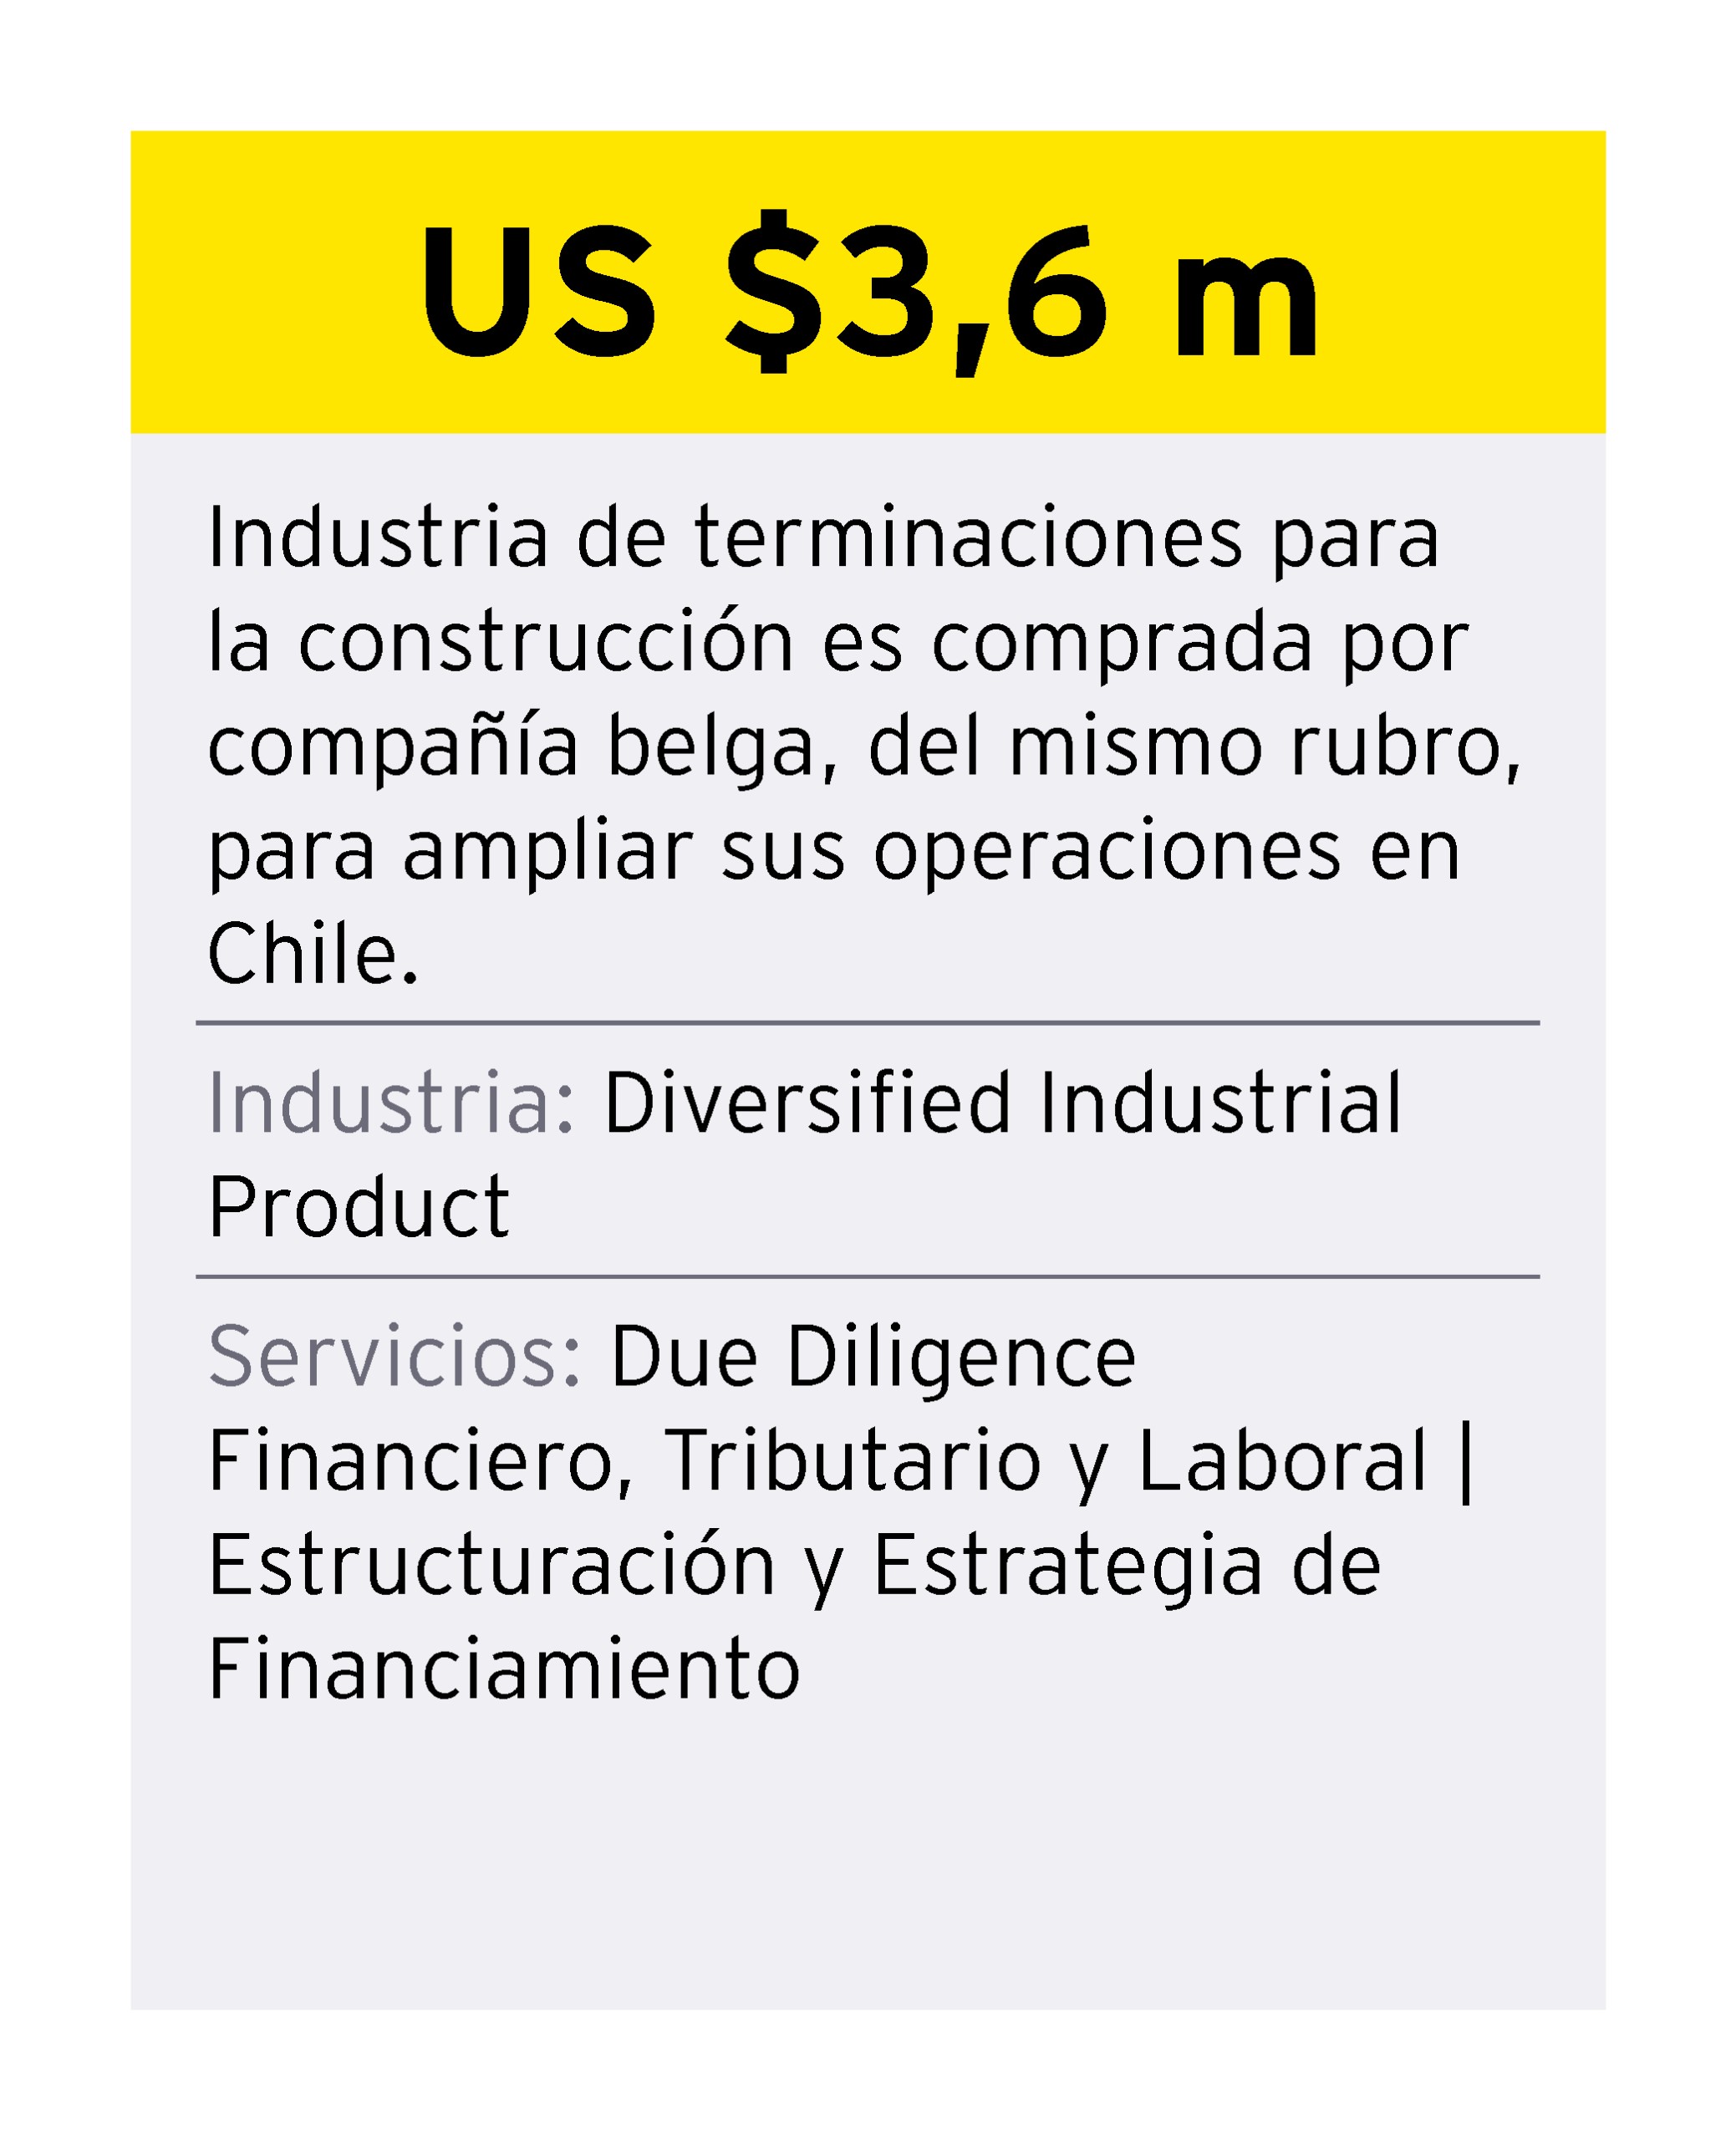 ey-chile-credencial-4-advanced-manufacturing